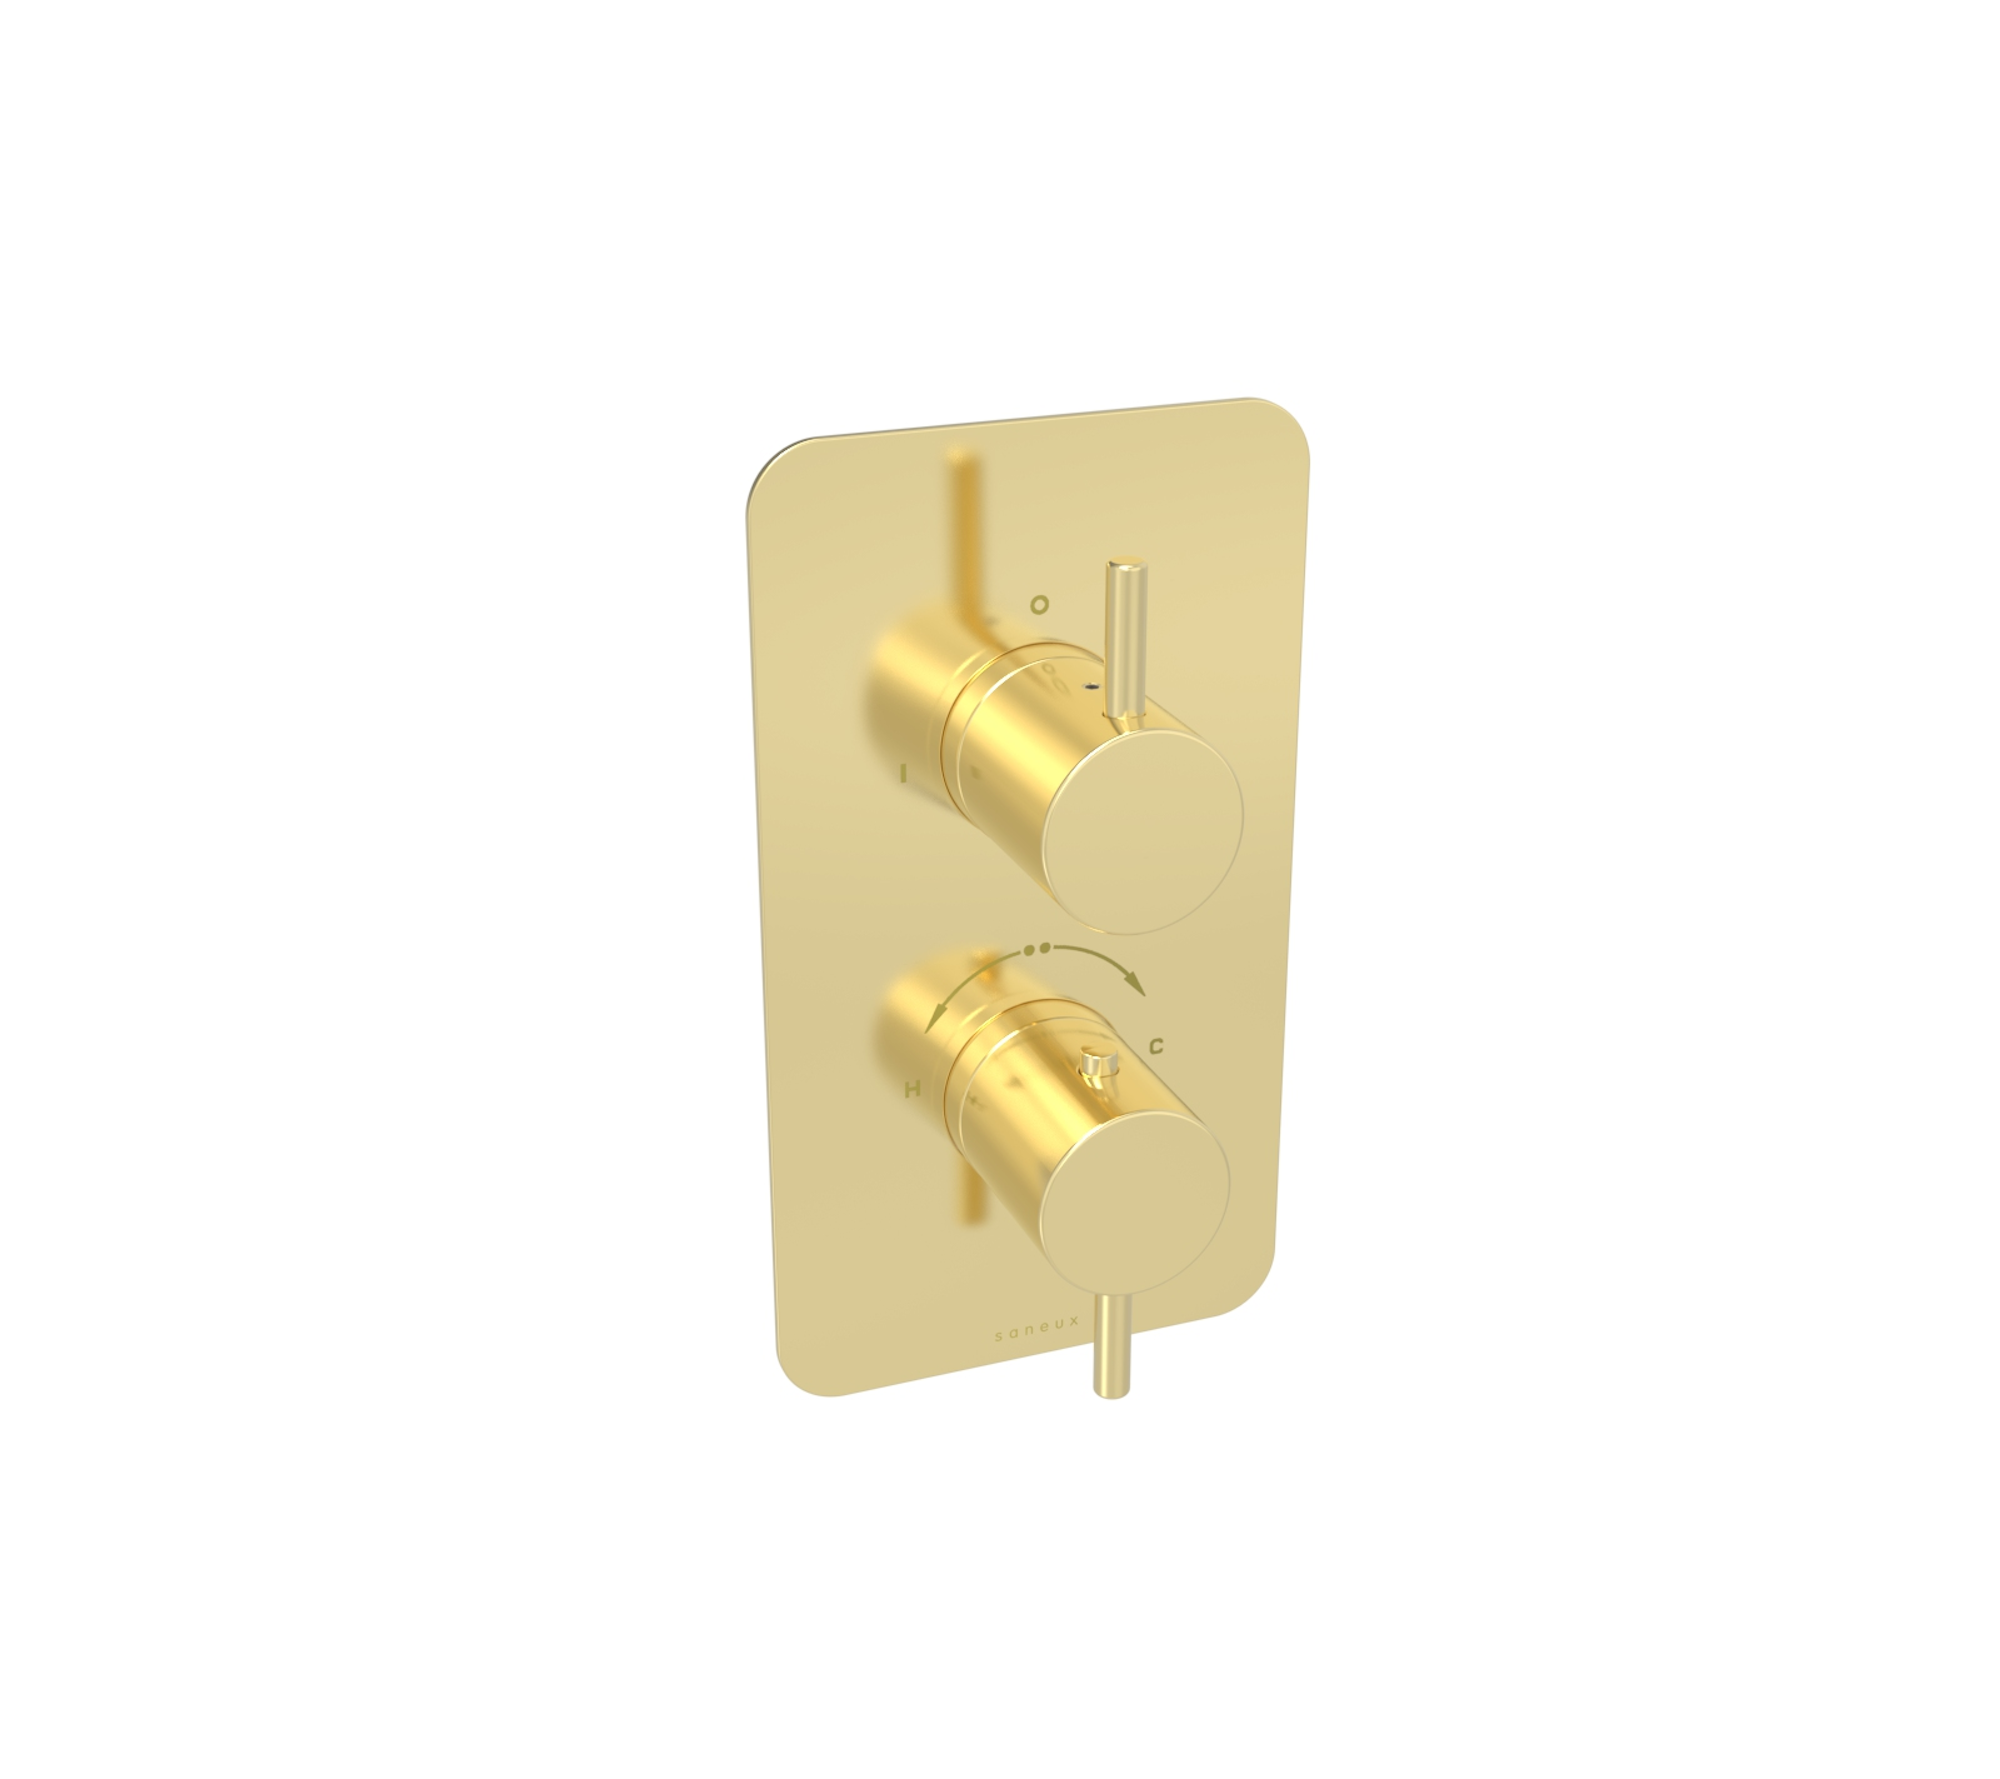 COS 2 way thermostatic shower valve kit - Brushed Brass